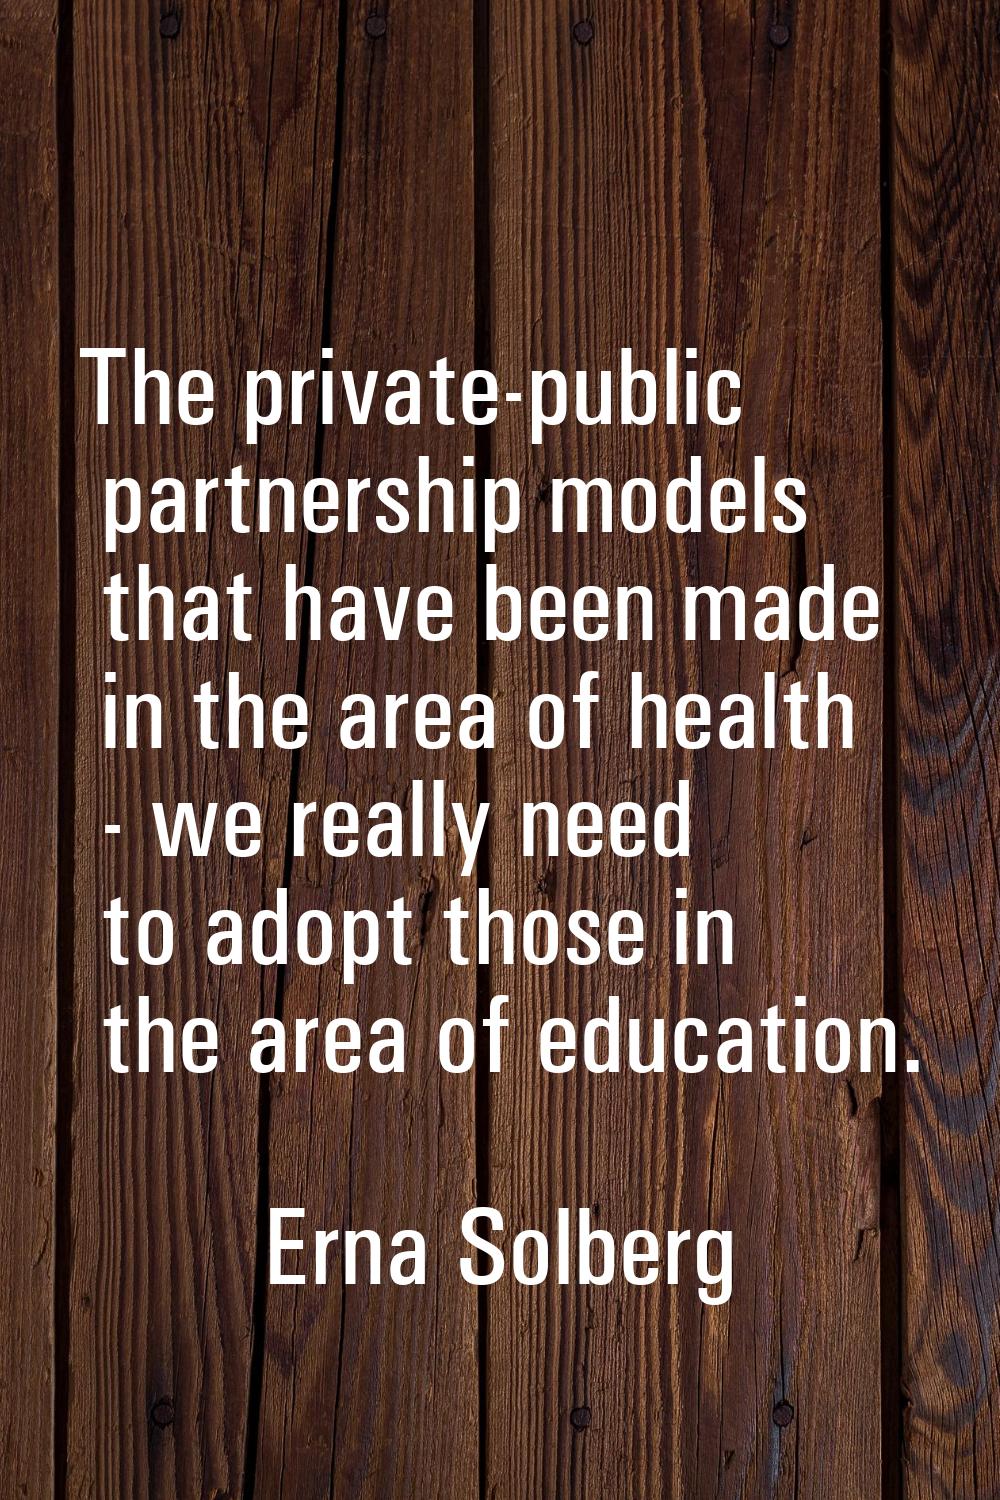 The private-public partnership models that have been made in the area of health - we really need to